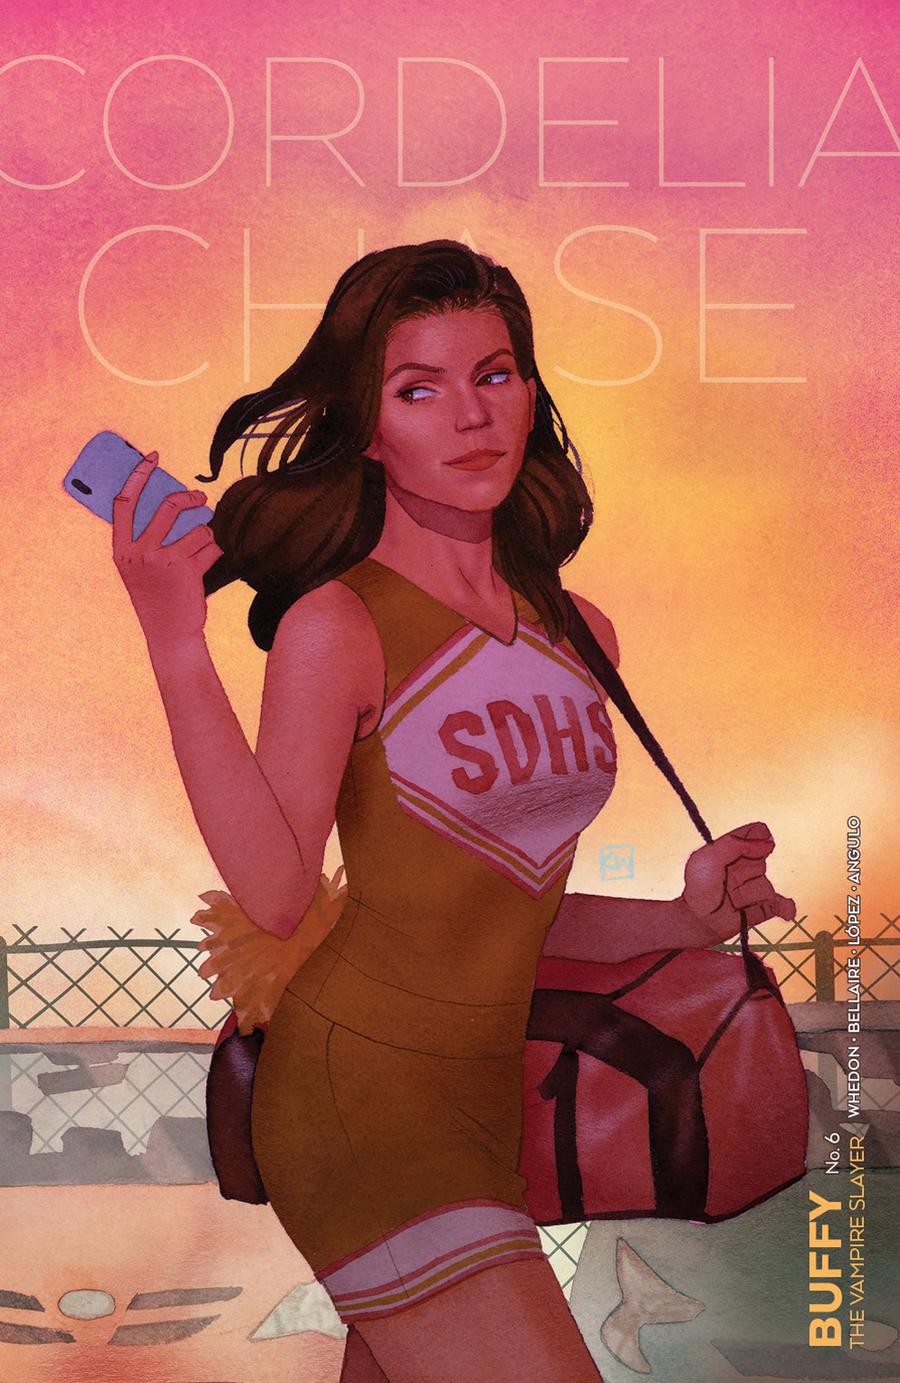 Buffy The Vampire Slayer Vol 2 #6 Cover B Variant Kevin Wada Cover